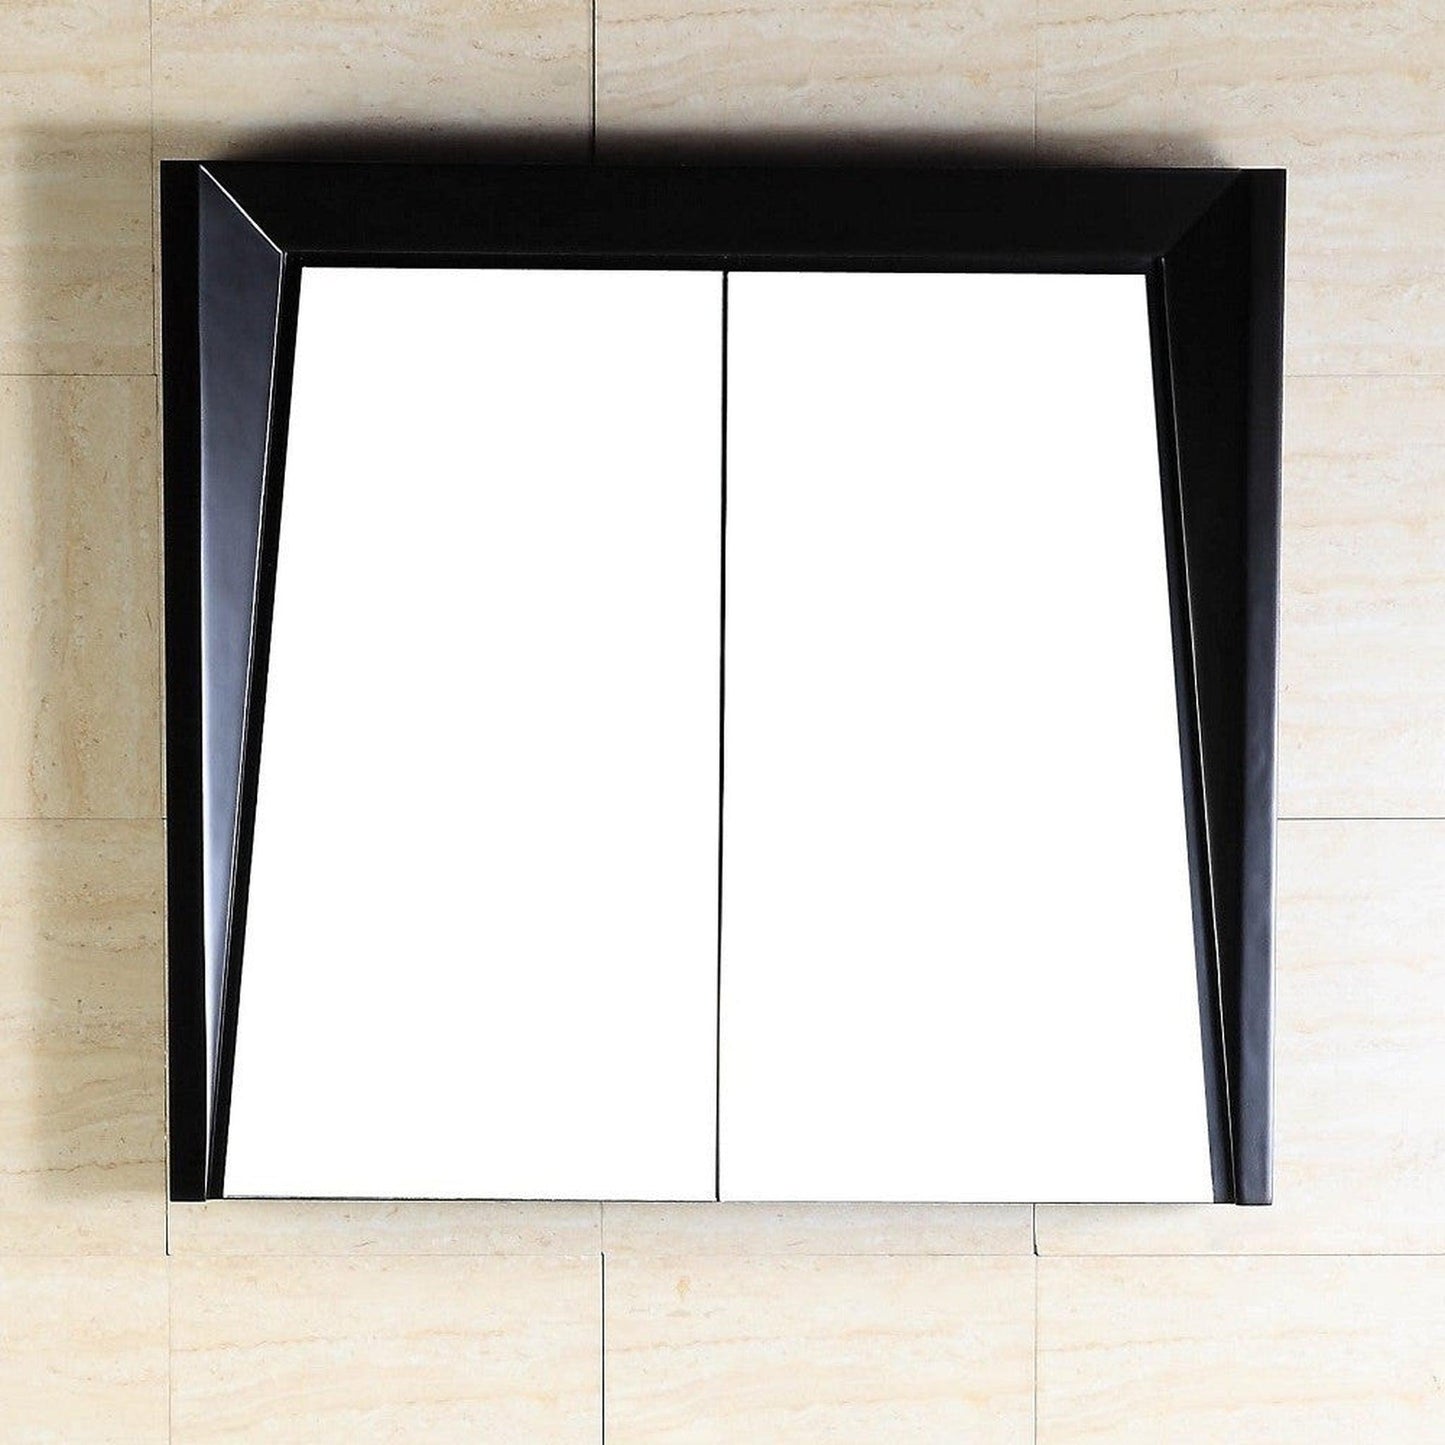 Bellaterra Home 30" x 26" Dark Espresso Angled Wall-Mounted Solid Wood Framed Mirror Cabinet